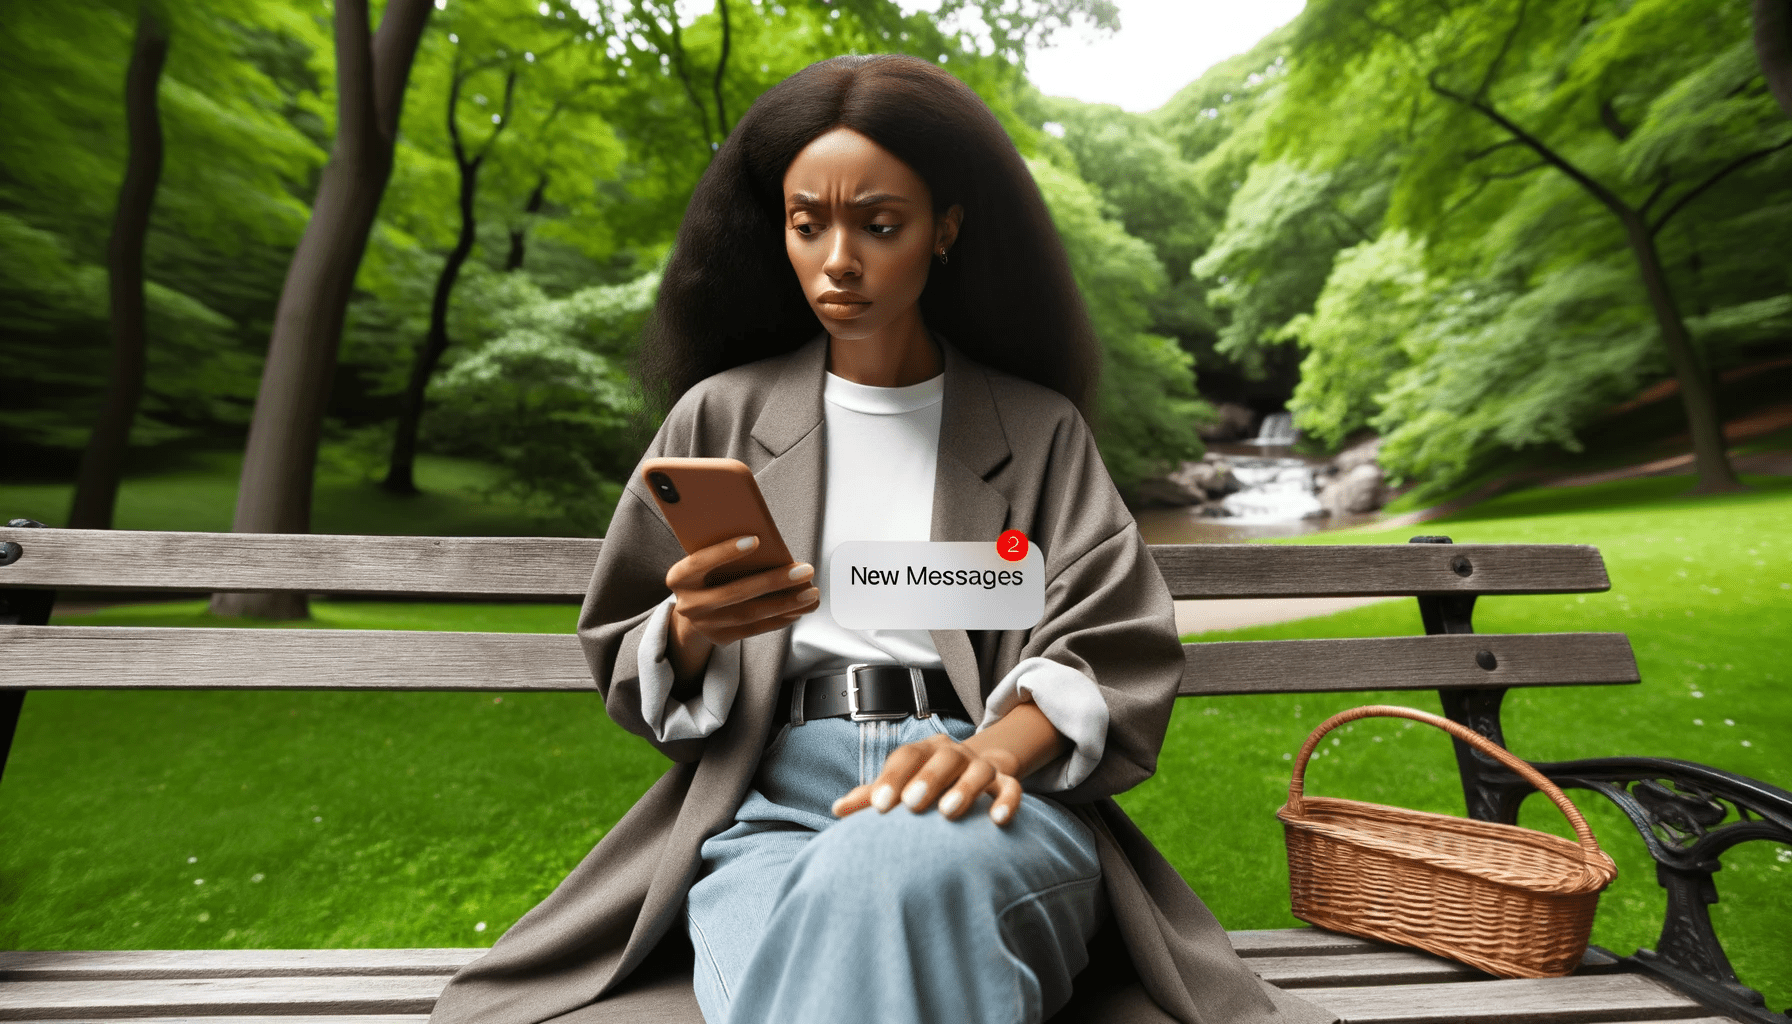 Photo of a park landscape with a diverse descent woman sitting on a bench. She glances at her phone displaying a new message notification and expres